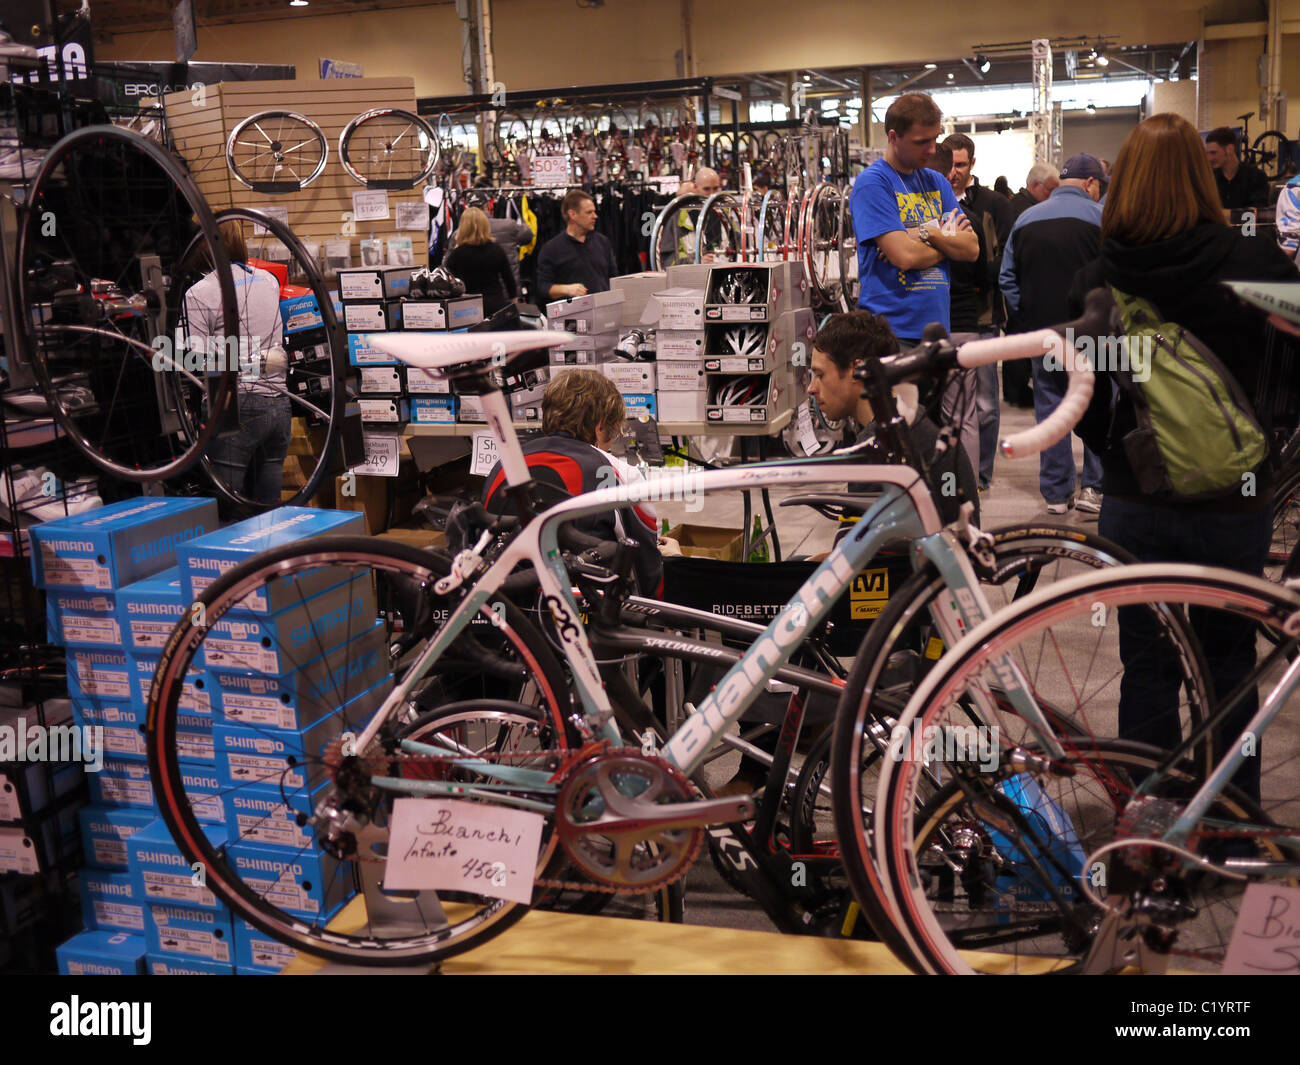 Expensive carbon fibre racing bicycles on display Stock Photo